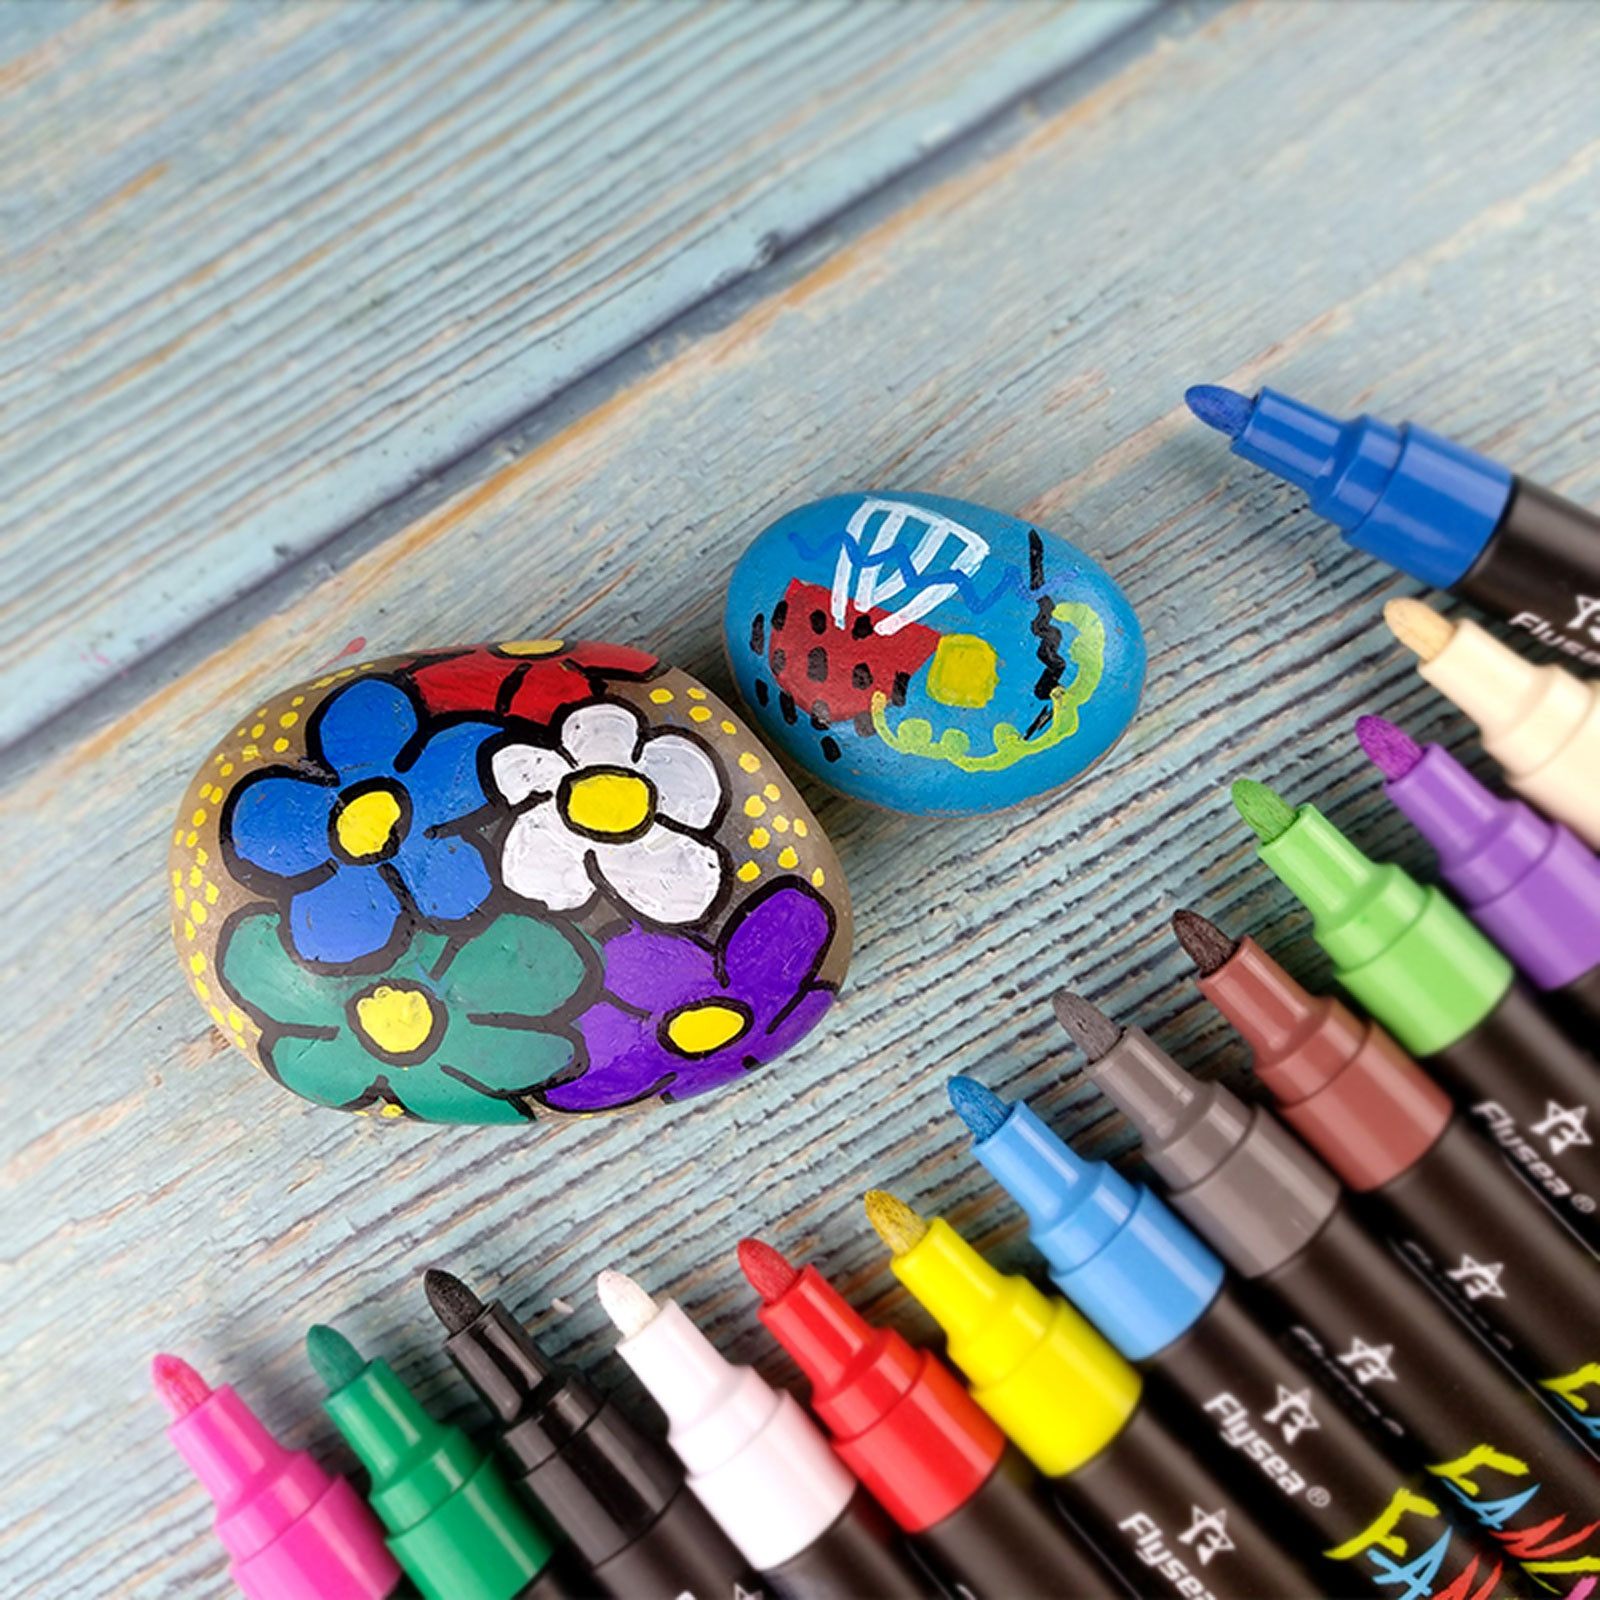 5 Paint Markers For Rock Painting Tested! (With Examples) – Rock